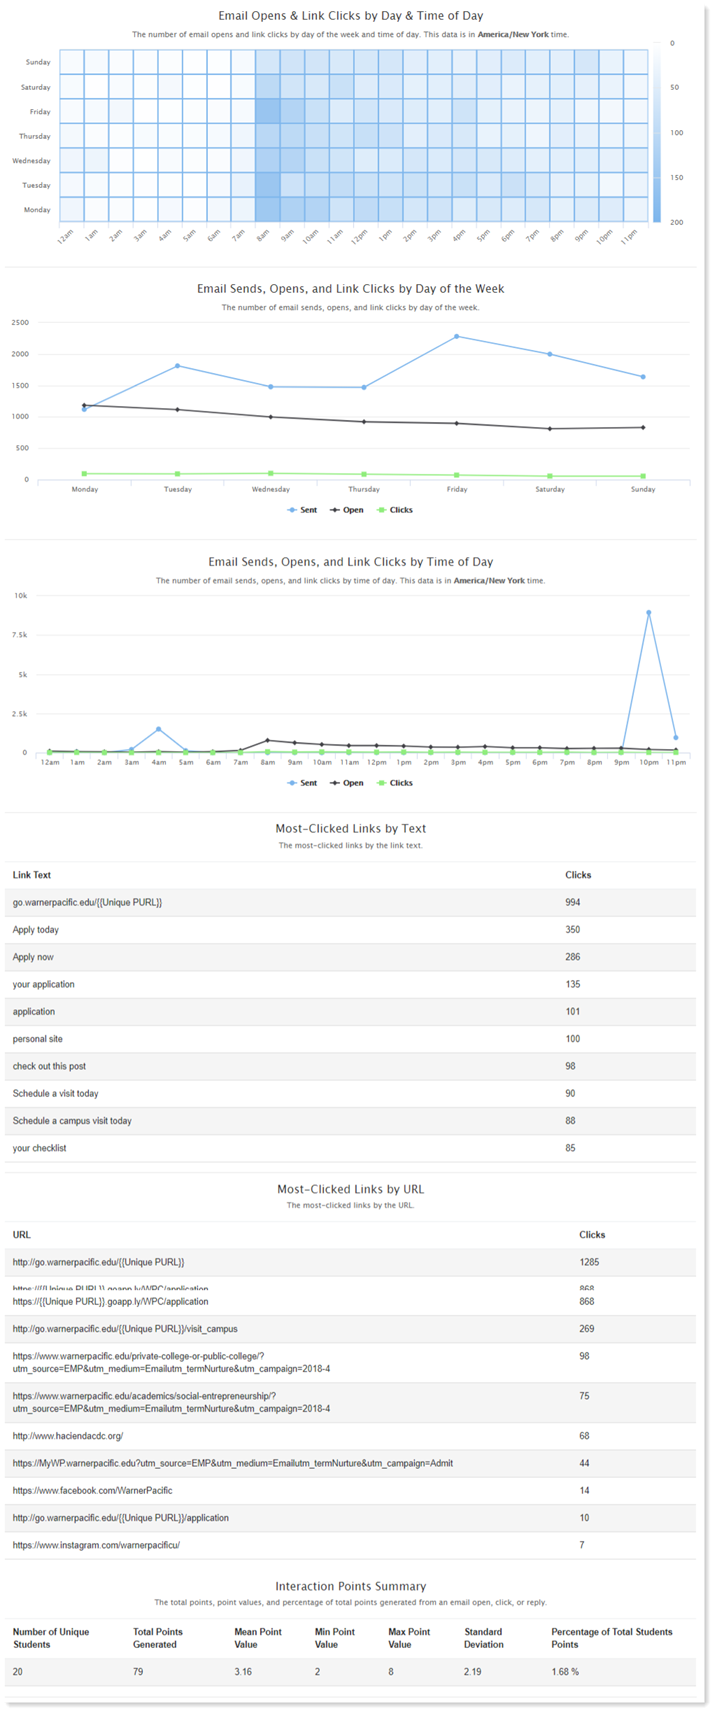 Campaign Analytics email opens and link clicks charts.